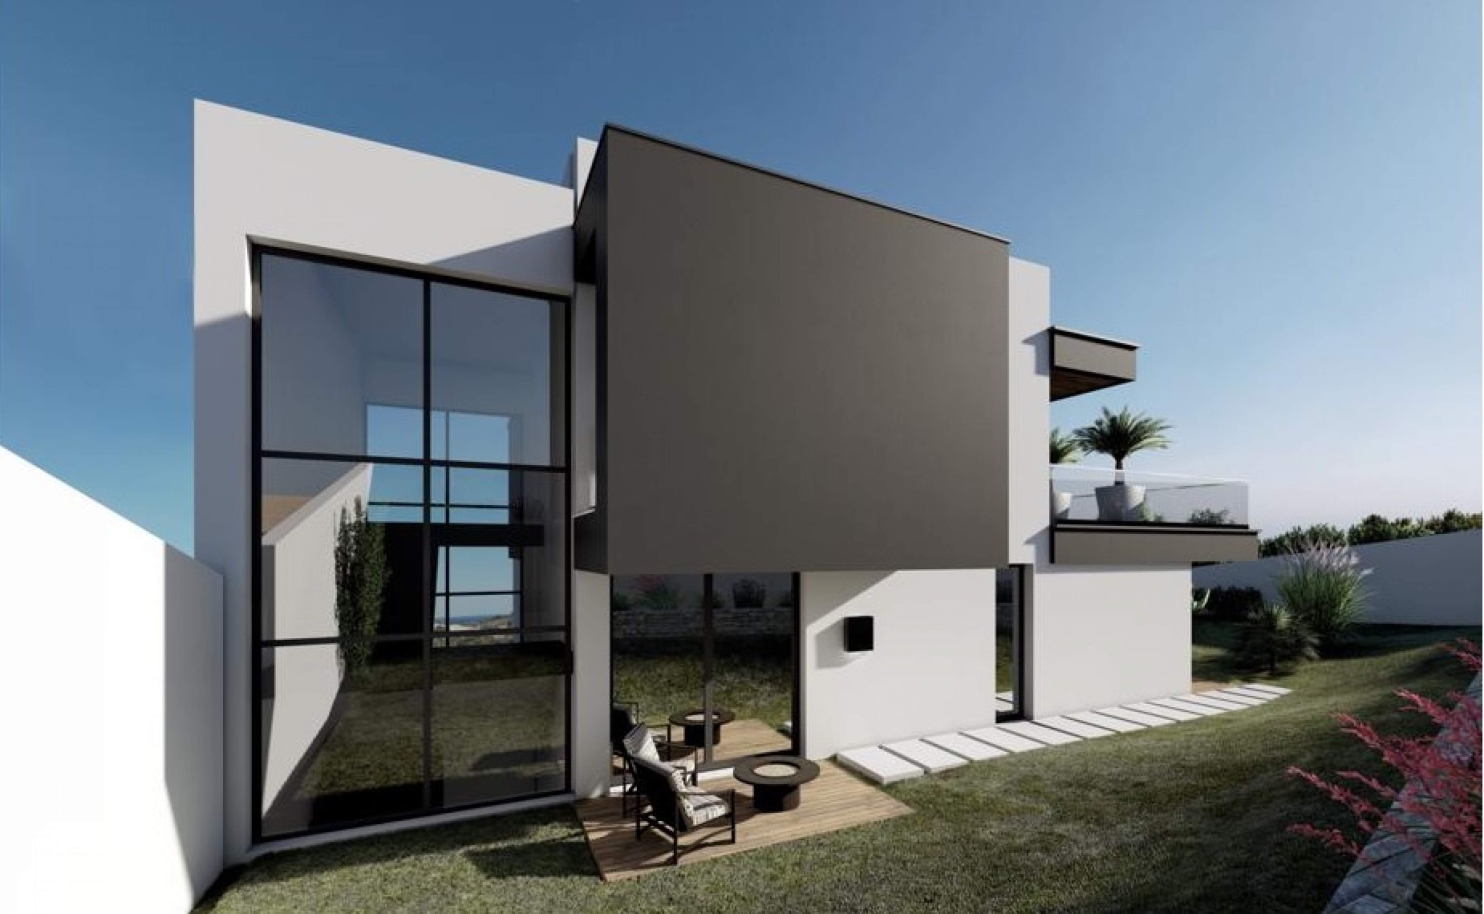 Villa with four bedrooms & swimming pool, under construction near Albufeira, Algarve_150214